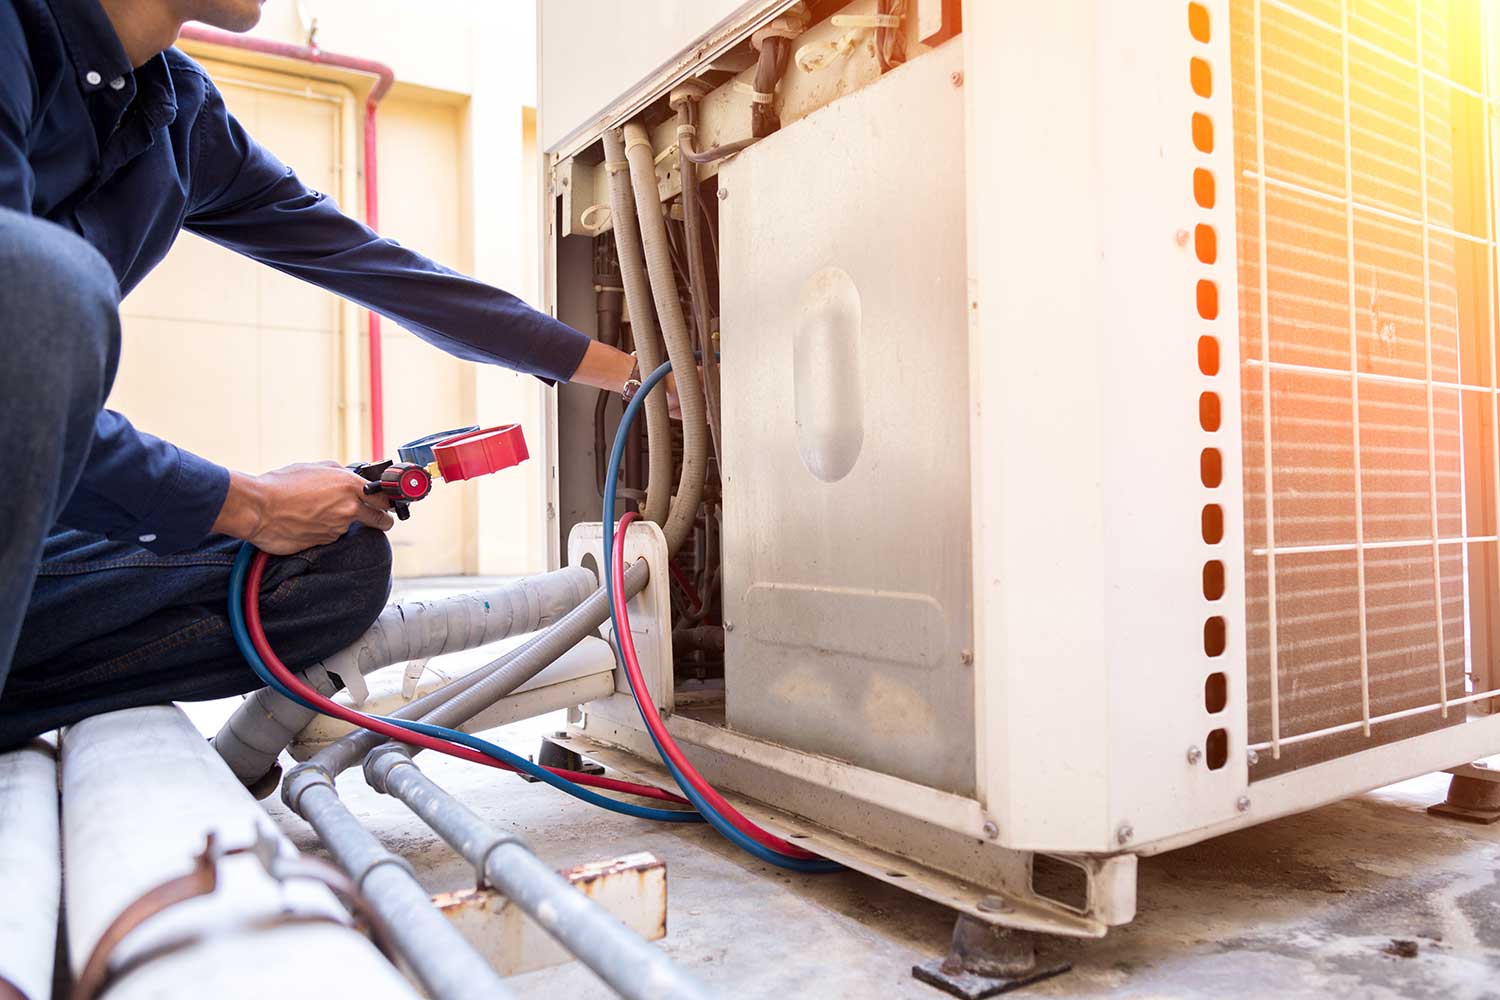 Dealing with a client who cannot pay for his HVAC service repairs